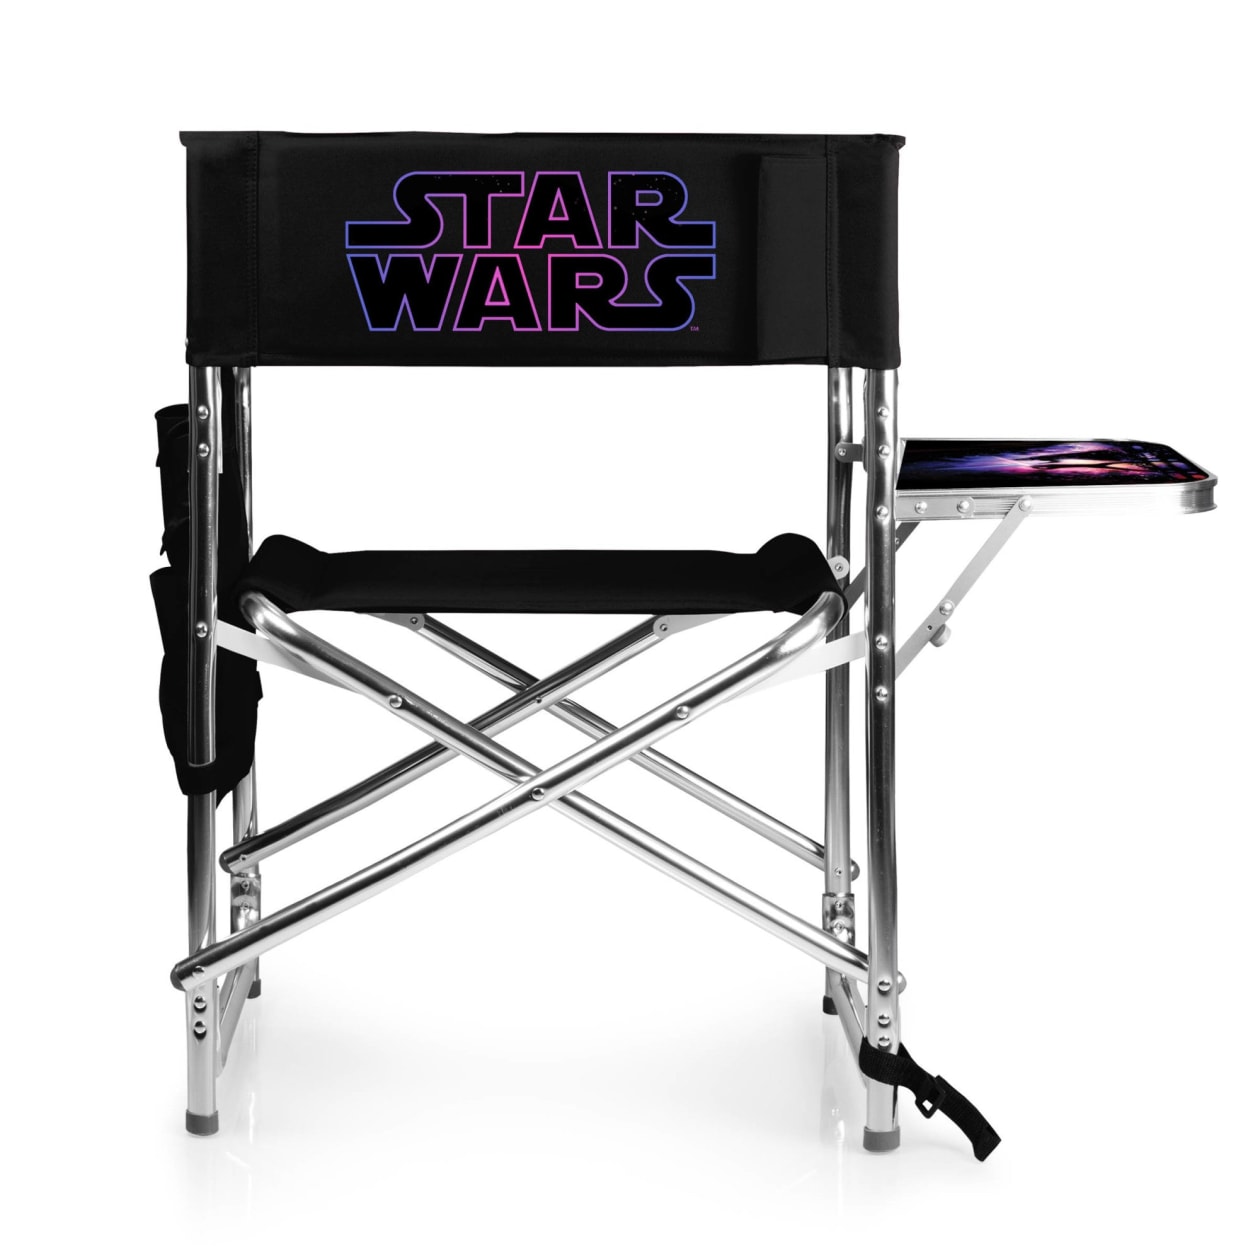 Star Wars - Sports Chair - Color: Black